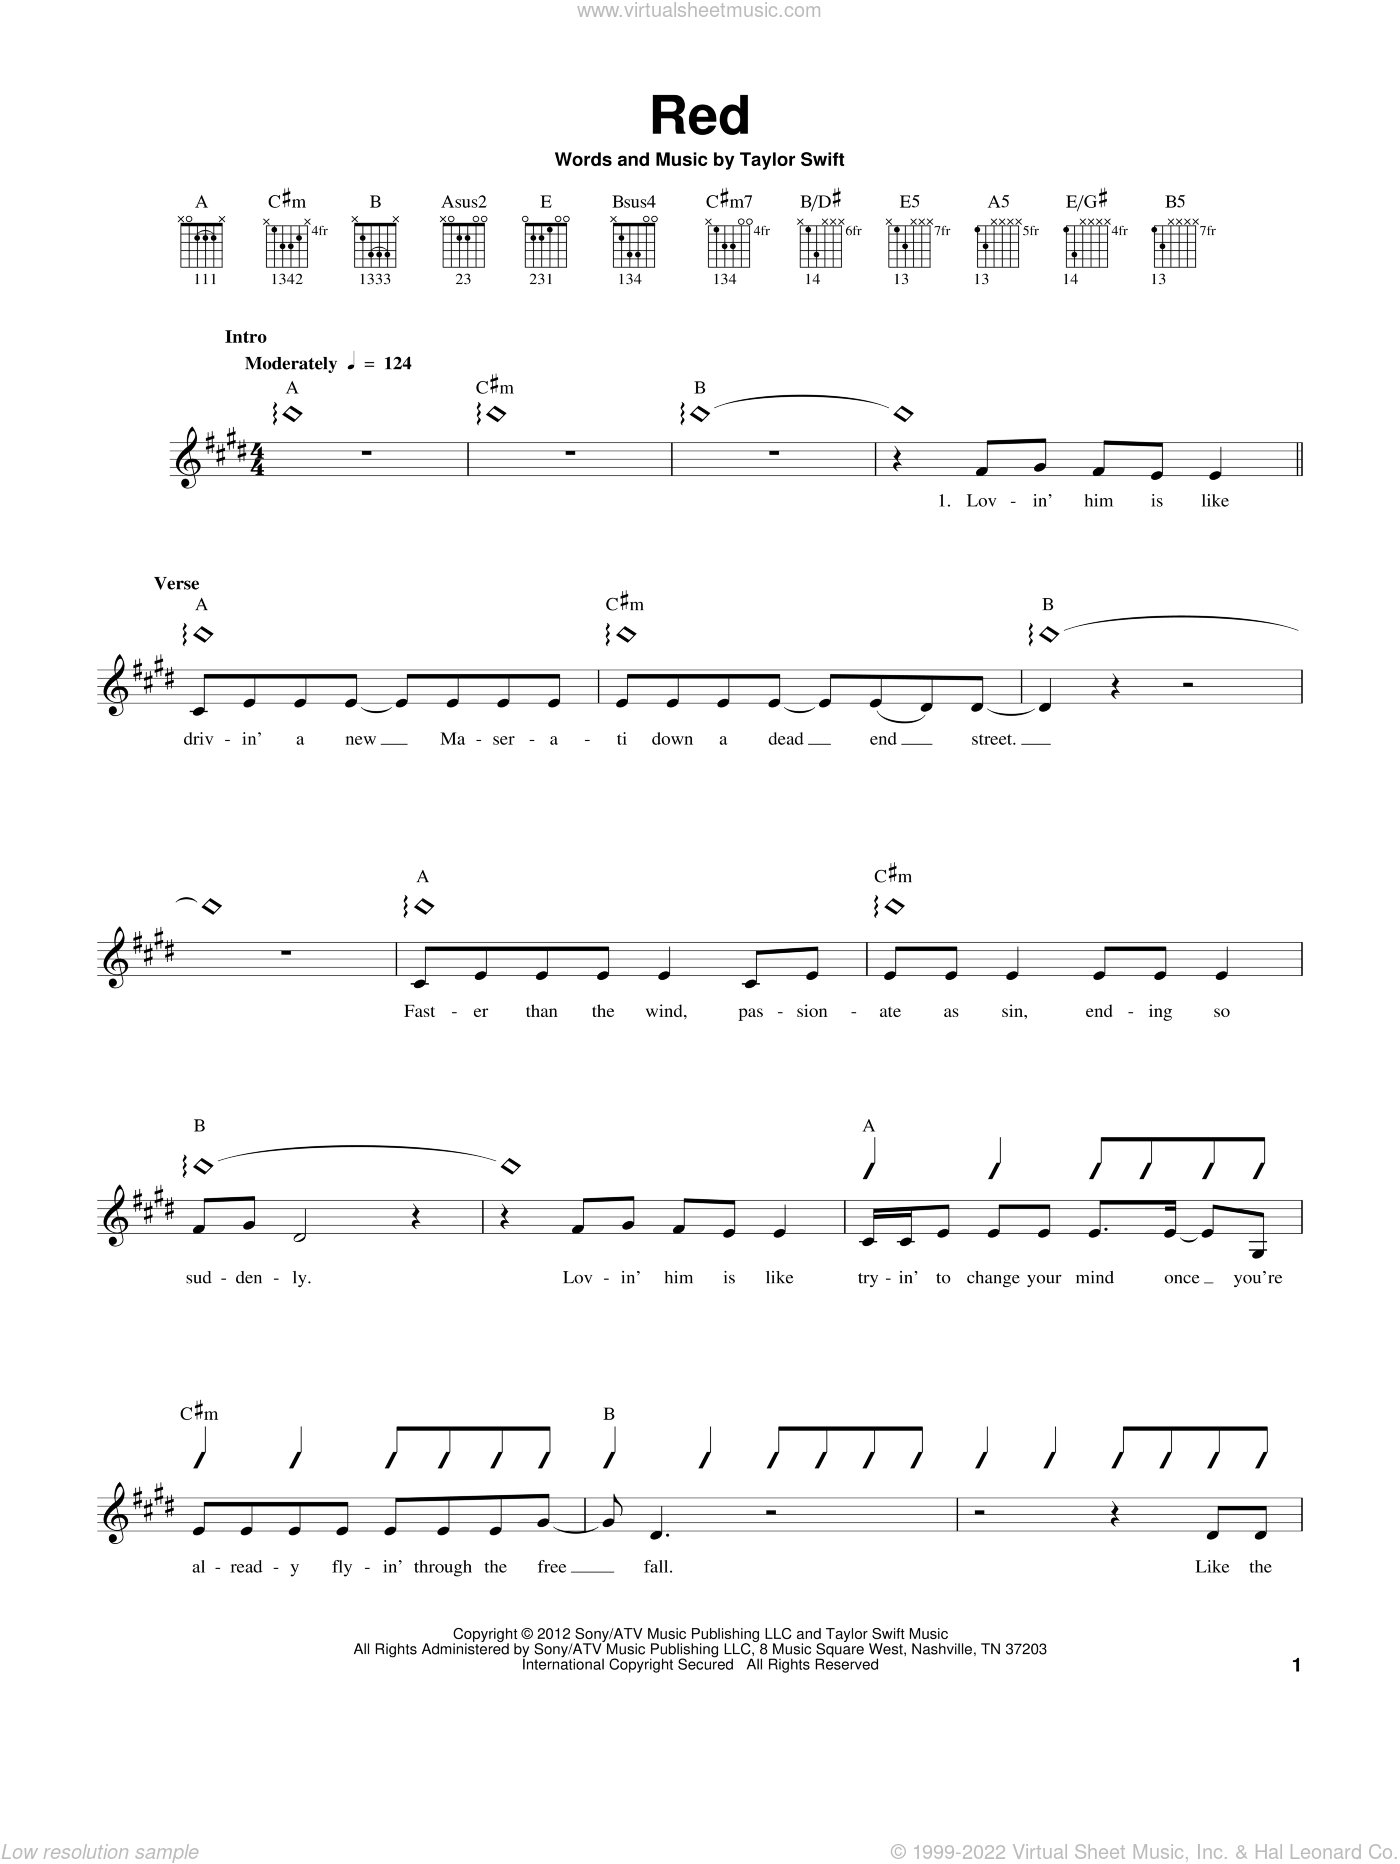 taylor swift mean guitar chords